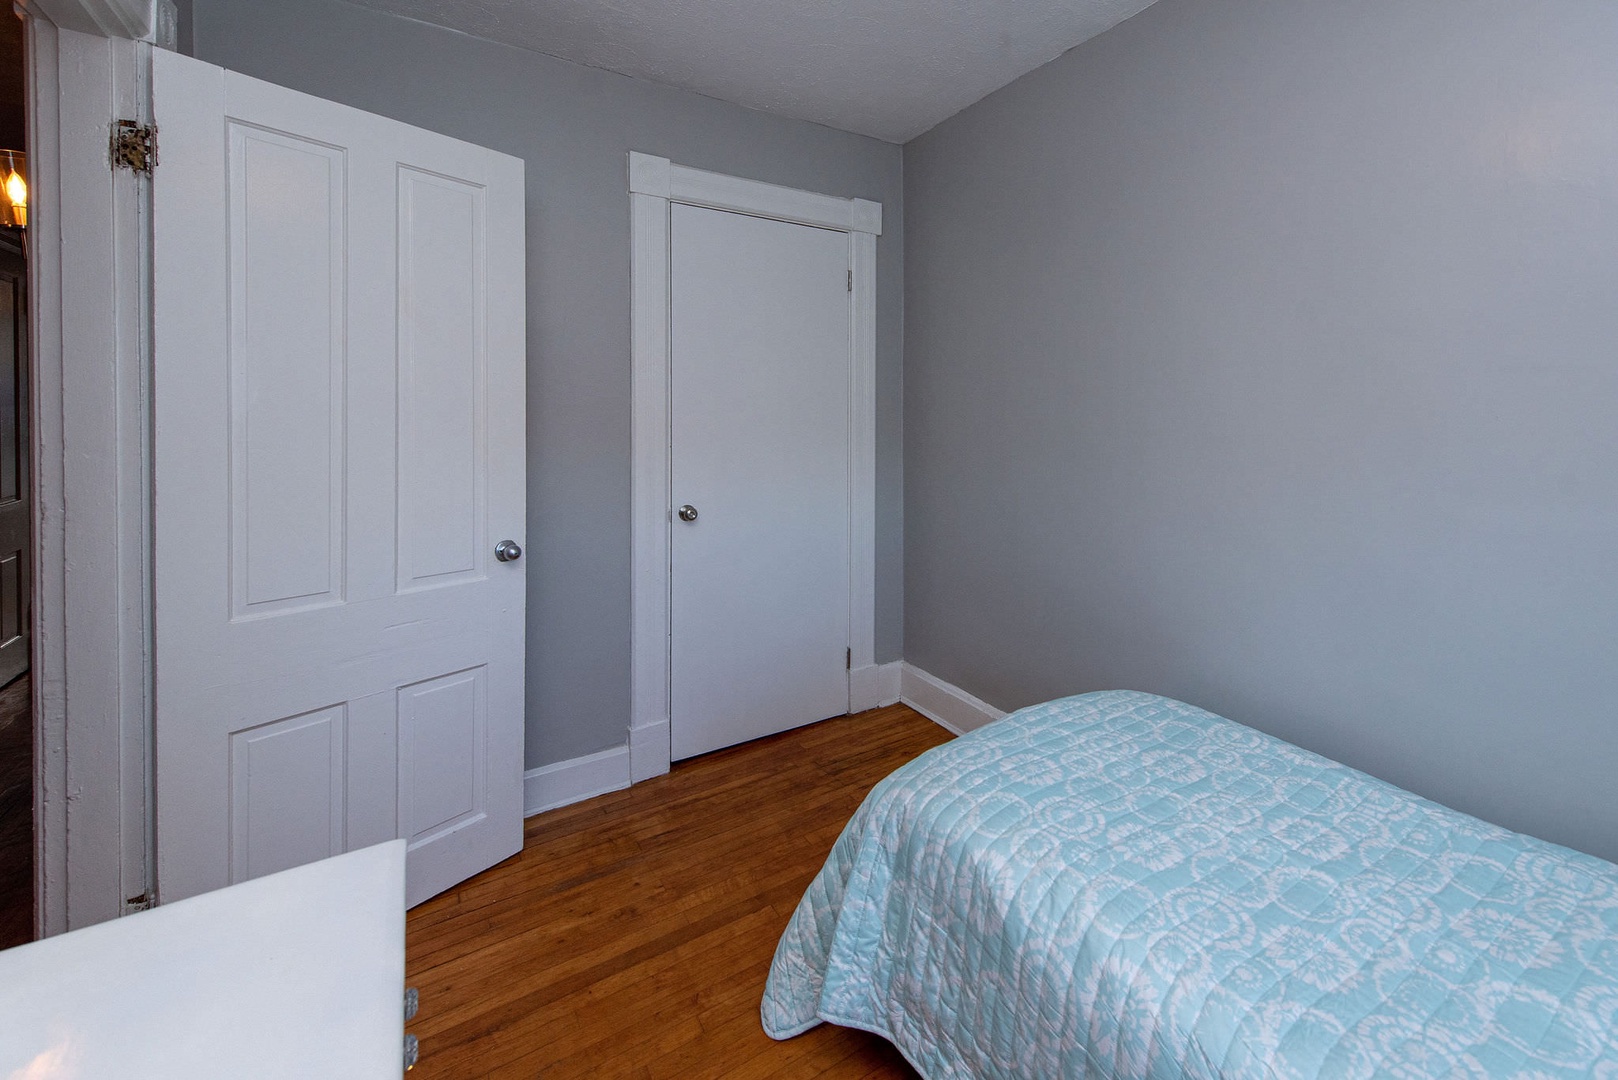 Suite 1 – The 3rd of 3 bedrooms offers a twin bed, dresser, & ceiling fan